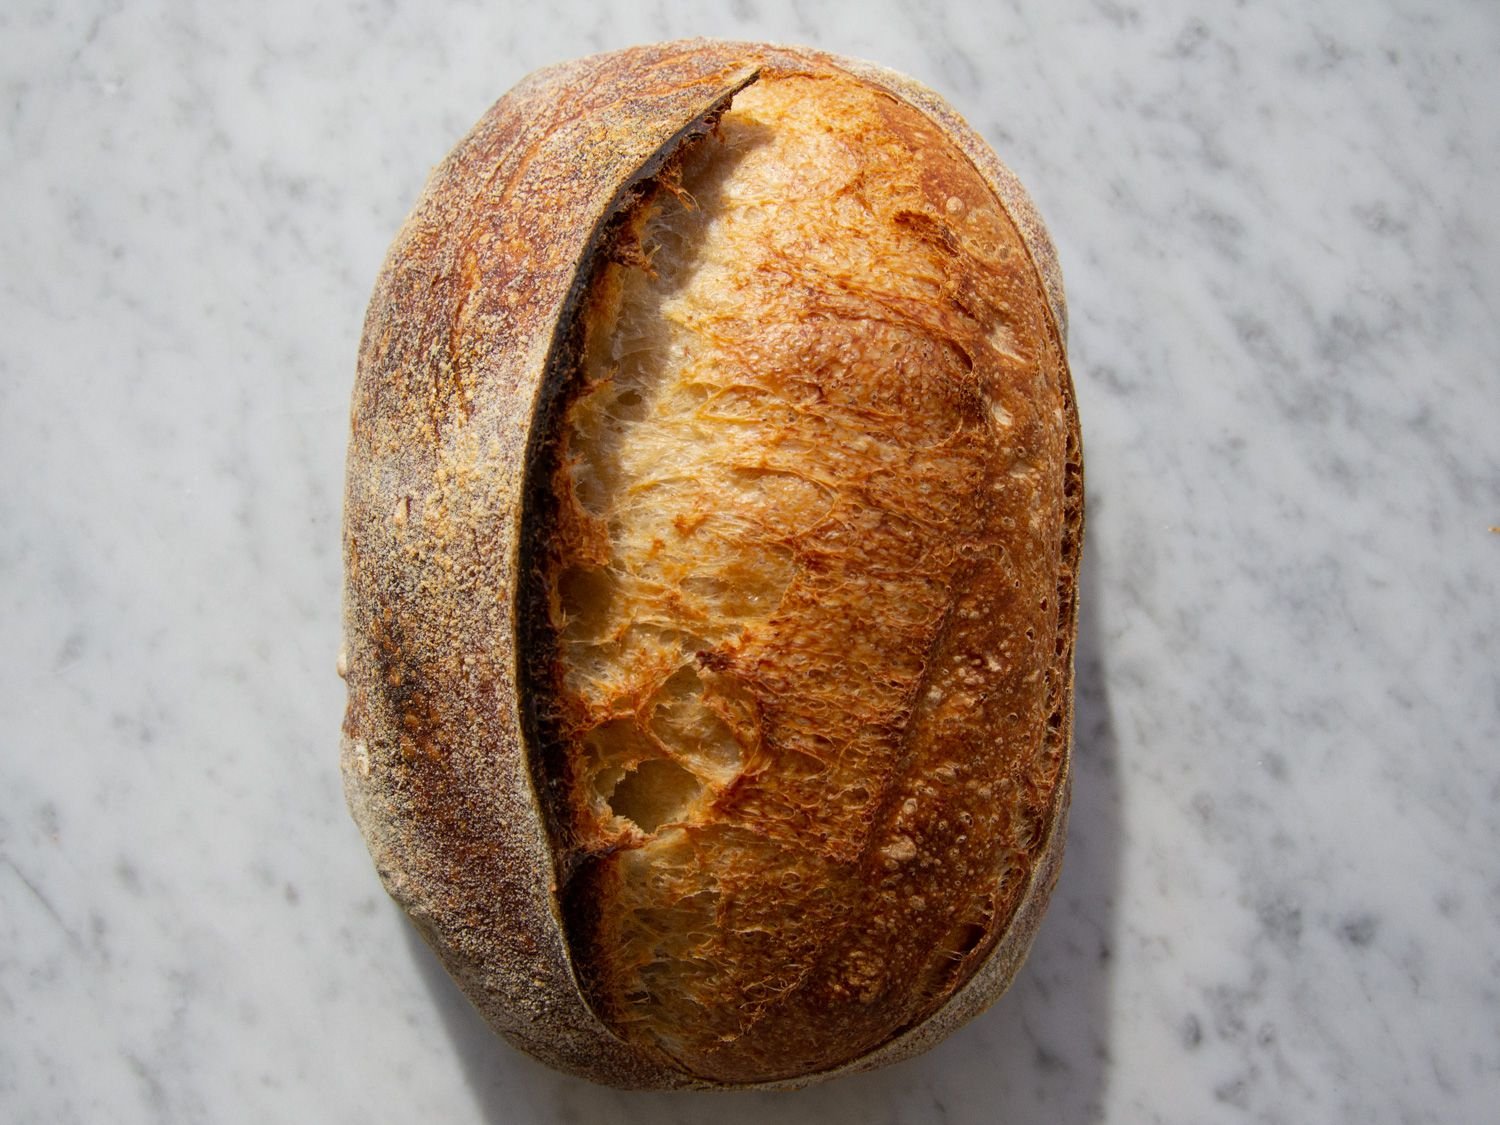 How to Make a Sourdough Bread Loaf